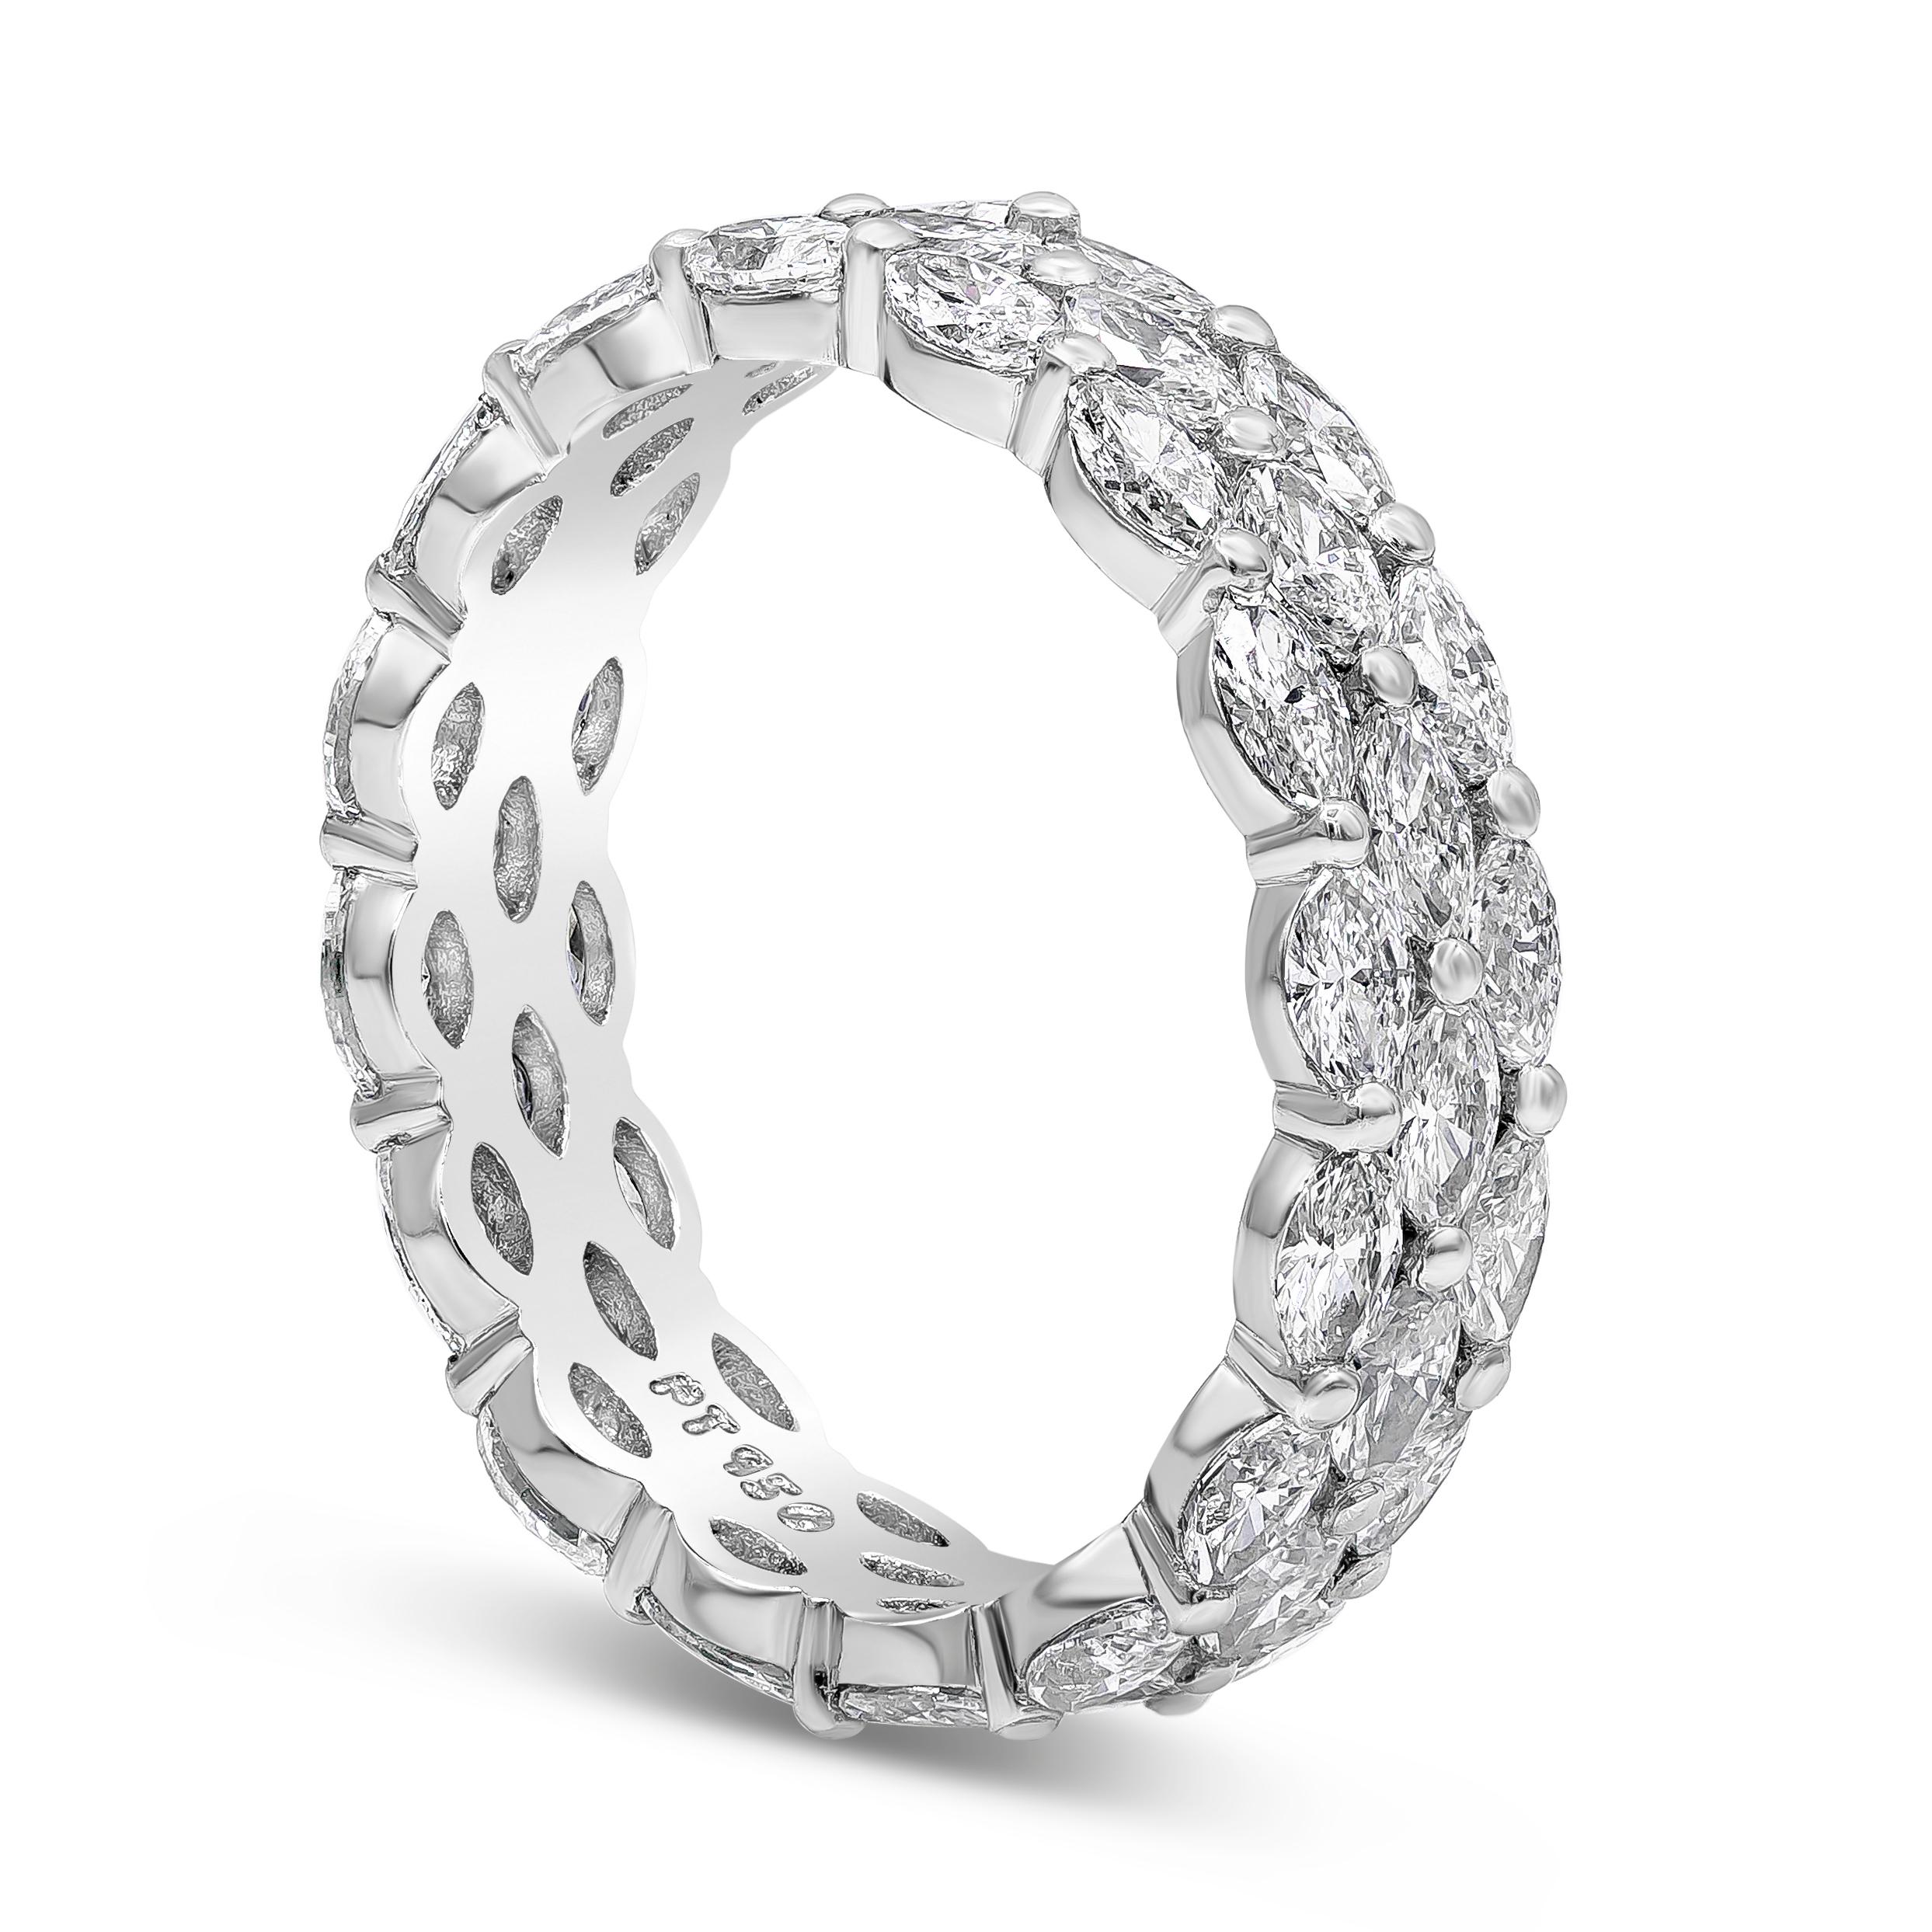 A stunning eternity wedding band features three rows of marquis cut diamonds weighing 2.56 carats total, Set East to West in a shared prong setting. Made in Platinum, Size 6.5 US

Style available in different price ranges. Prices are based on your